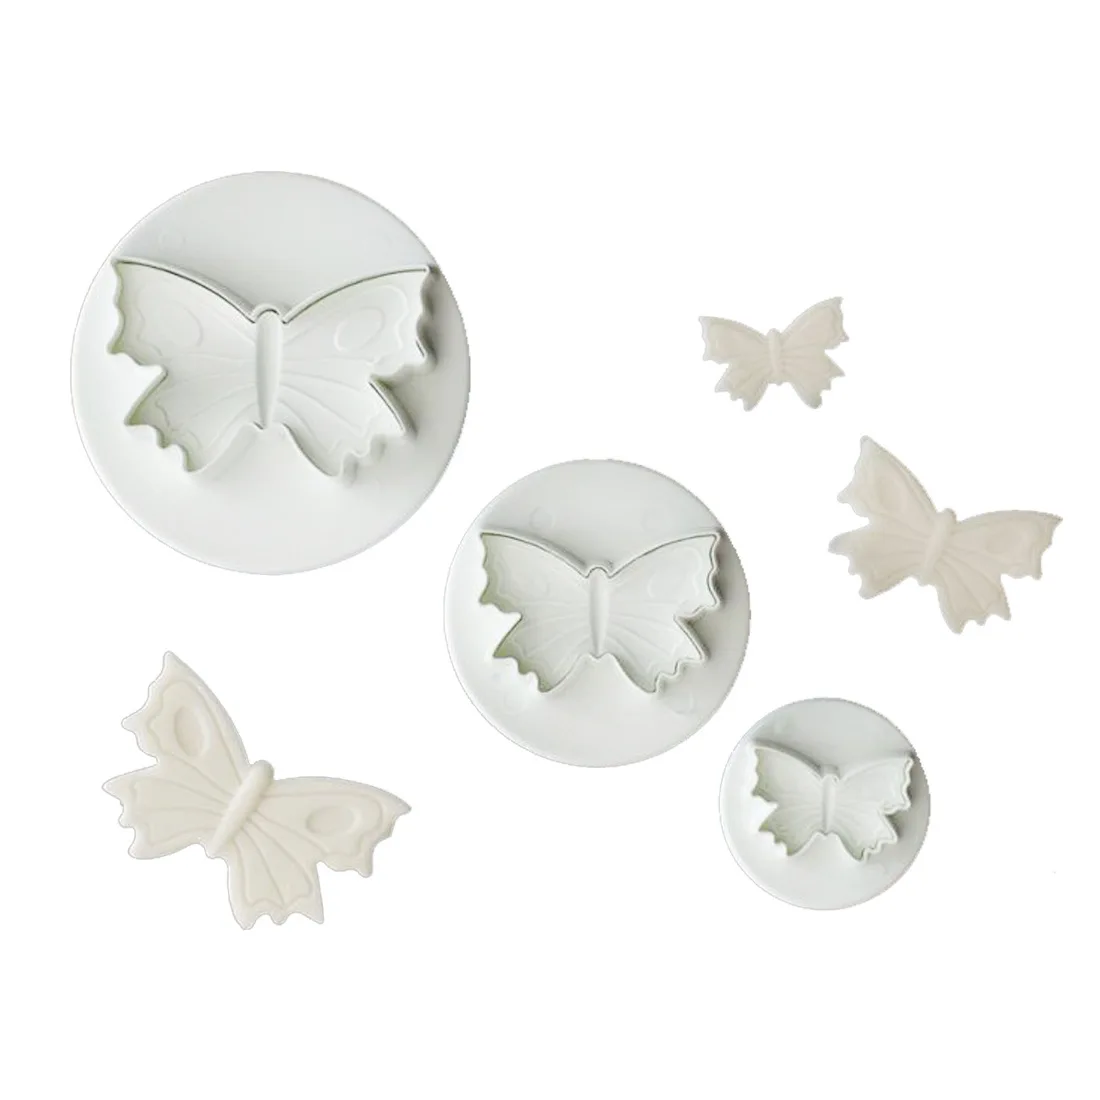 

3Pcs Butterfly Cookie Cutter Press Molds Baking Cake Decoration Chocolates Embossing Biscuit Printing Moulds For Kitchen tools